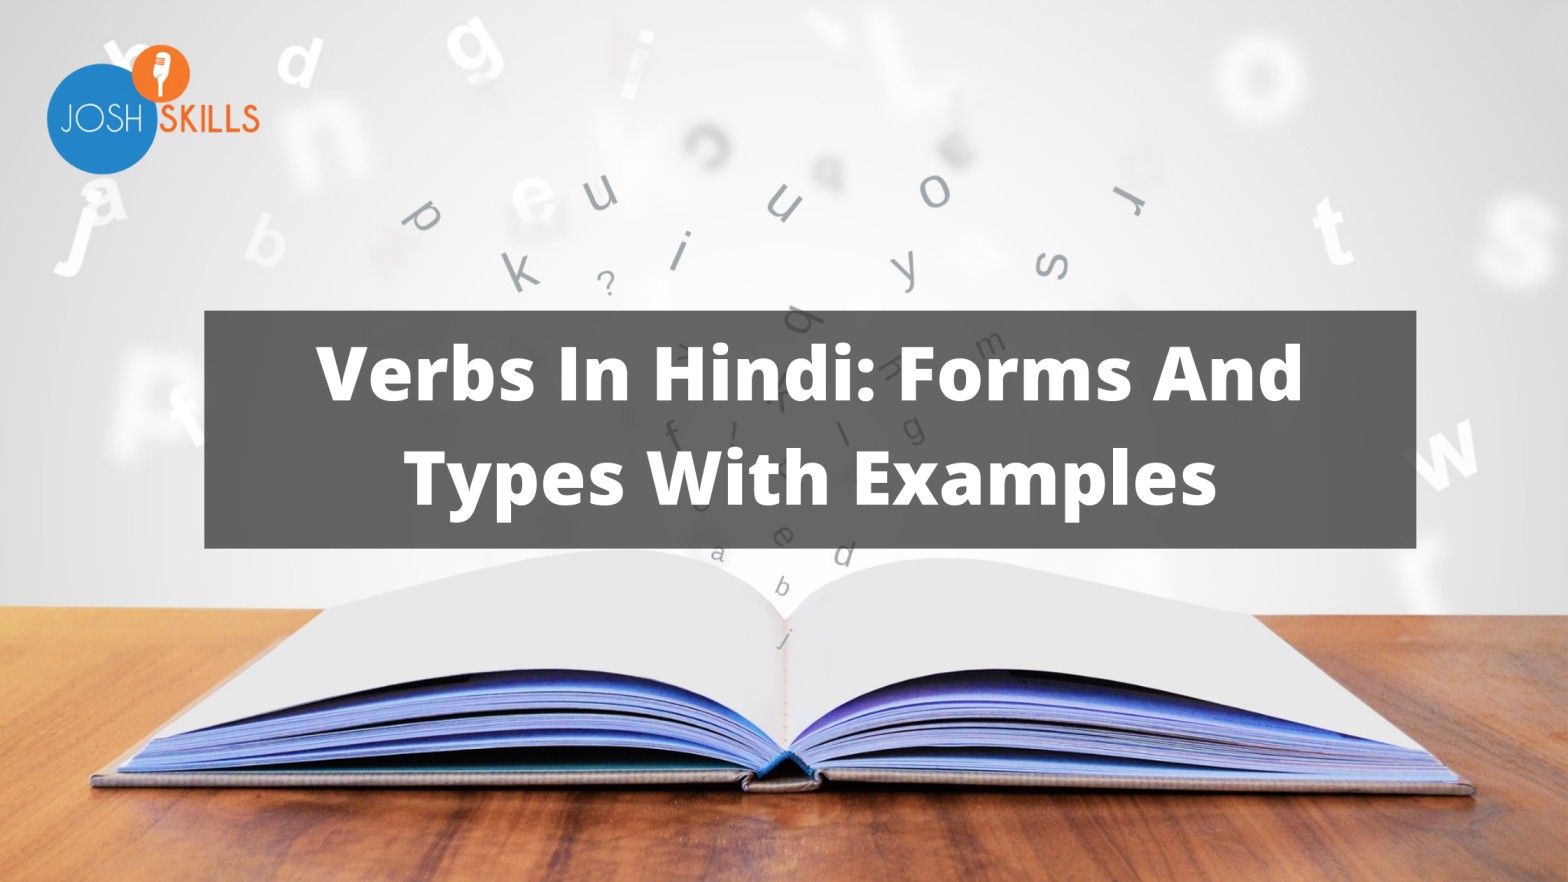 verbs-in-hindi-forms-and-types-with-examples-josh